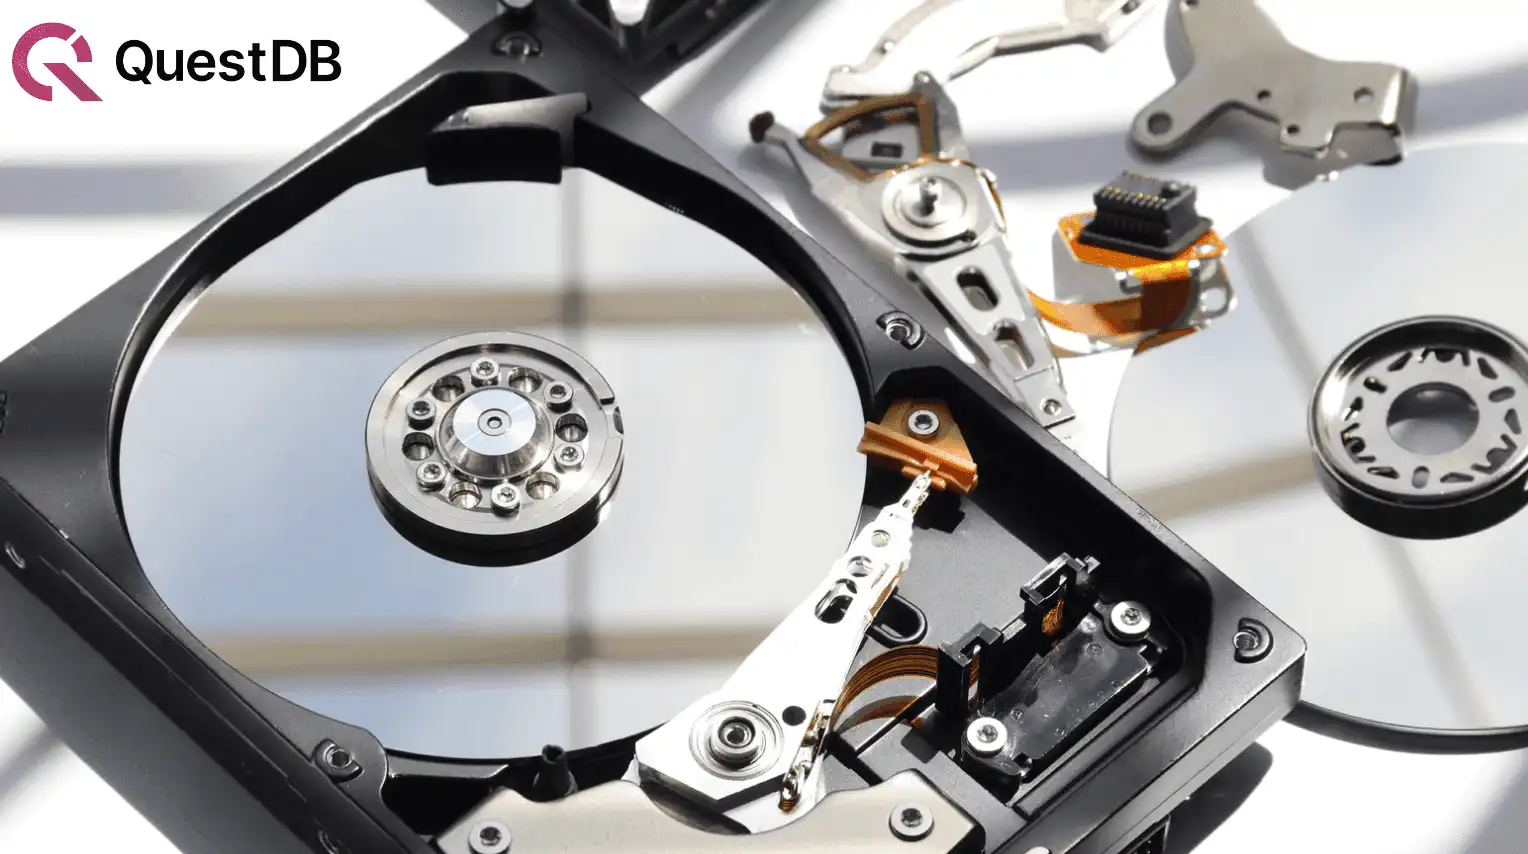 Image of a hard disk drive.